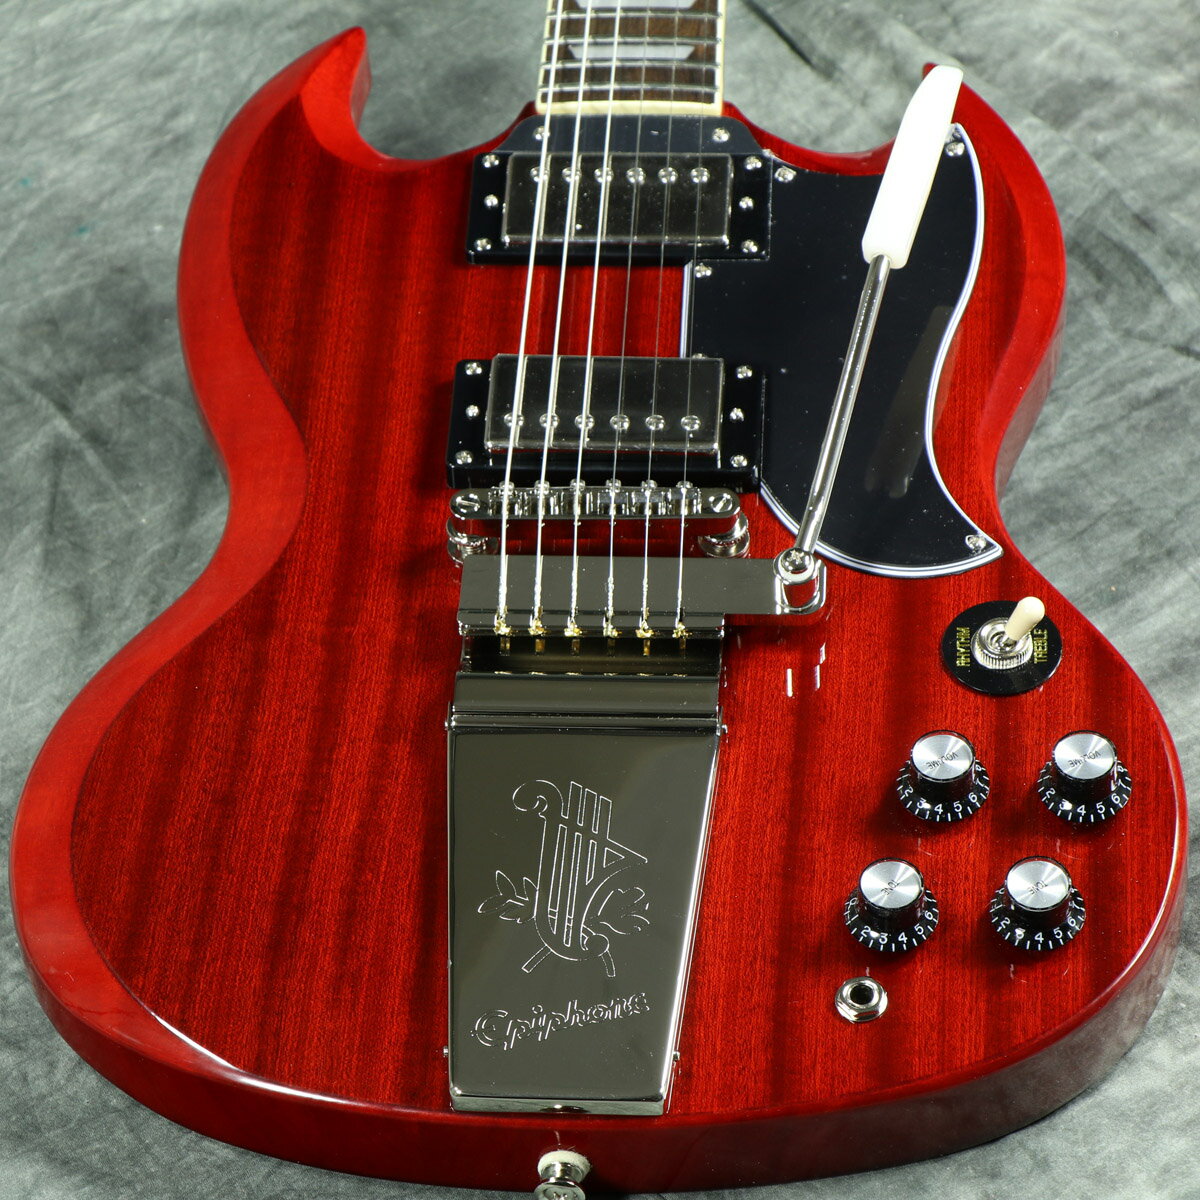 Epiphone by Gibson / Inspired by Gibson SG Standard 60s Maestro Vibrola Vintage Cherry エピフォン エレキギター